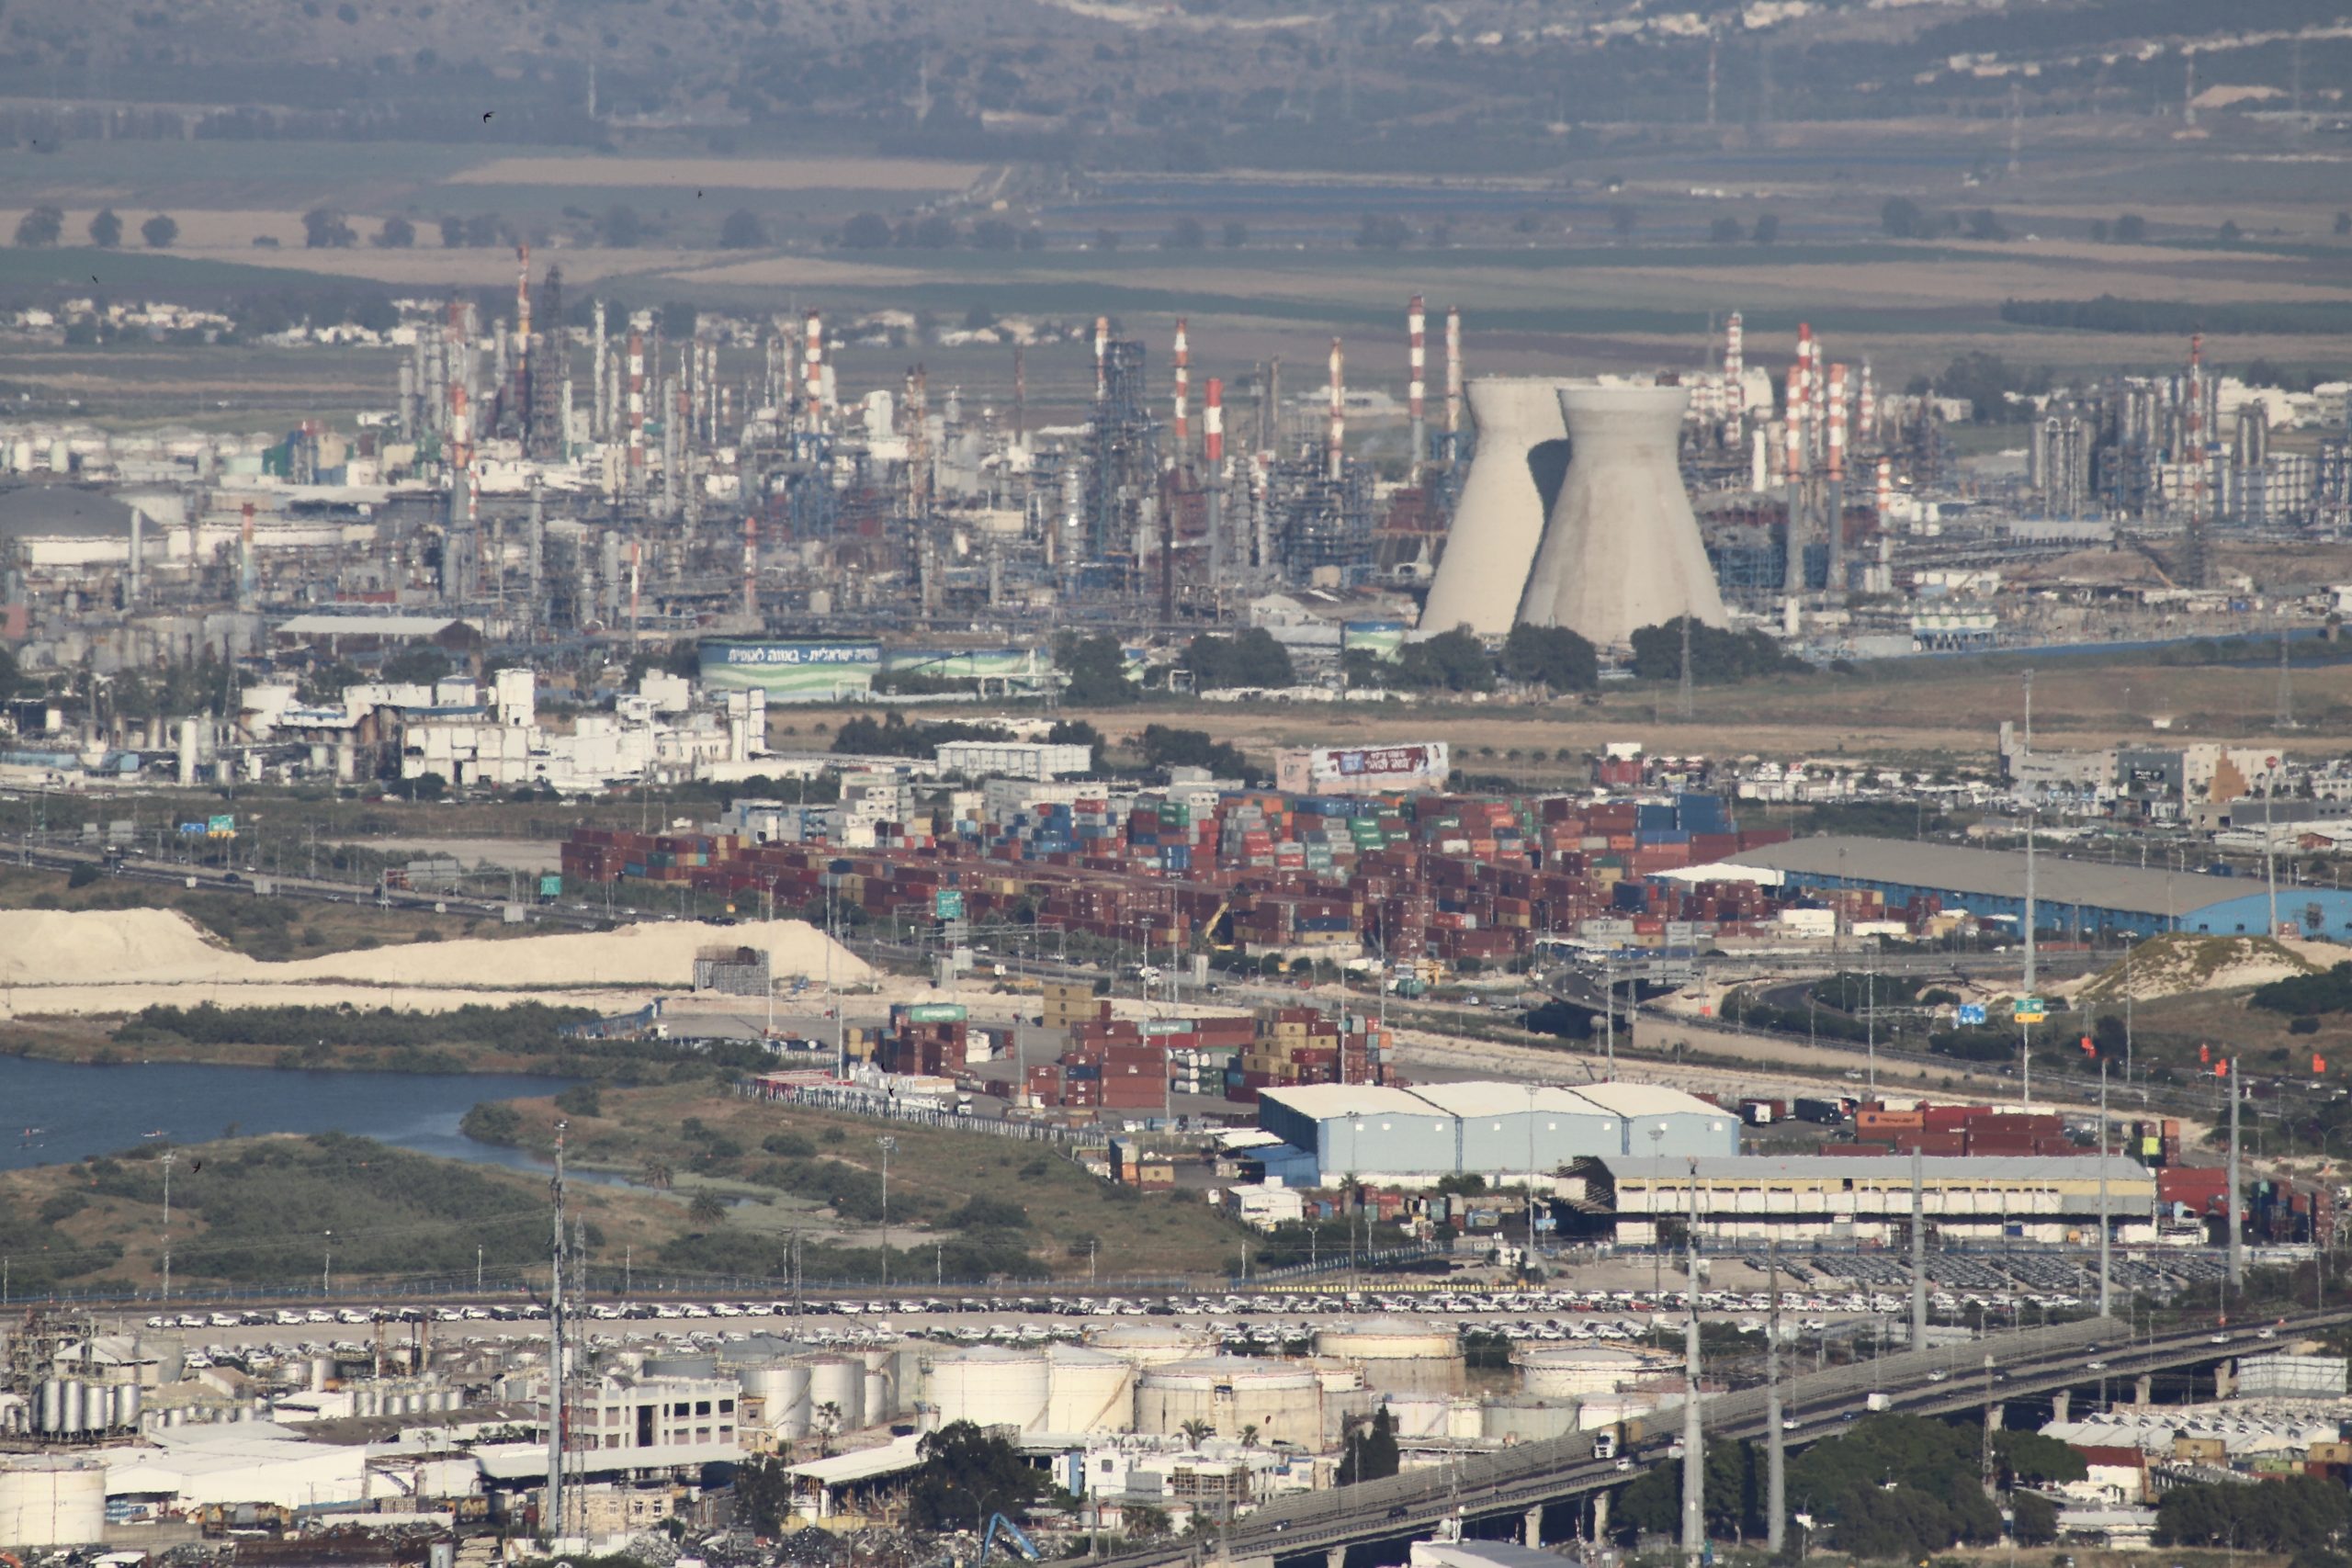 Iconic cooling towers at Haifa Refinery (Bazan Group)